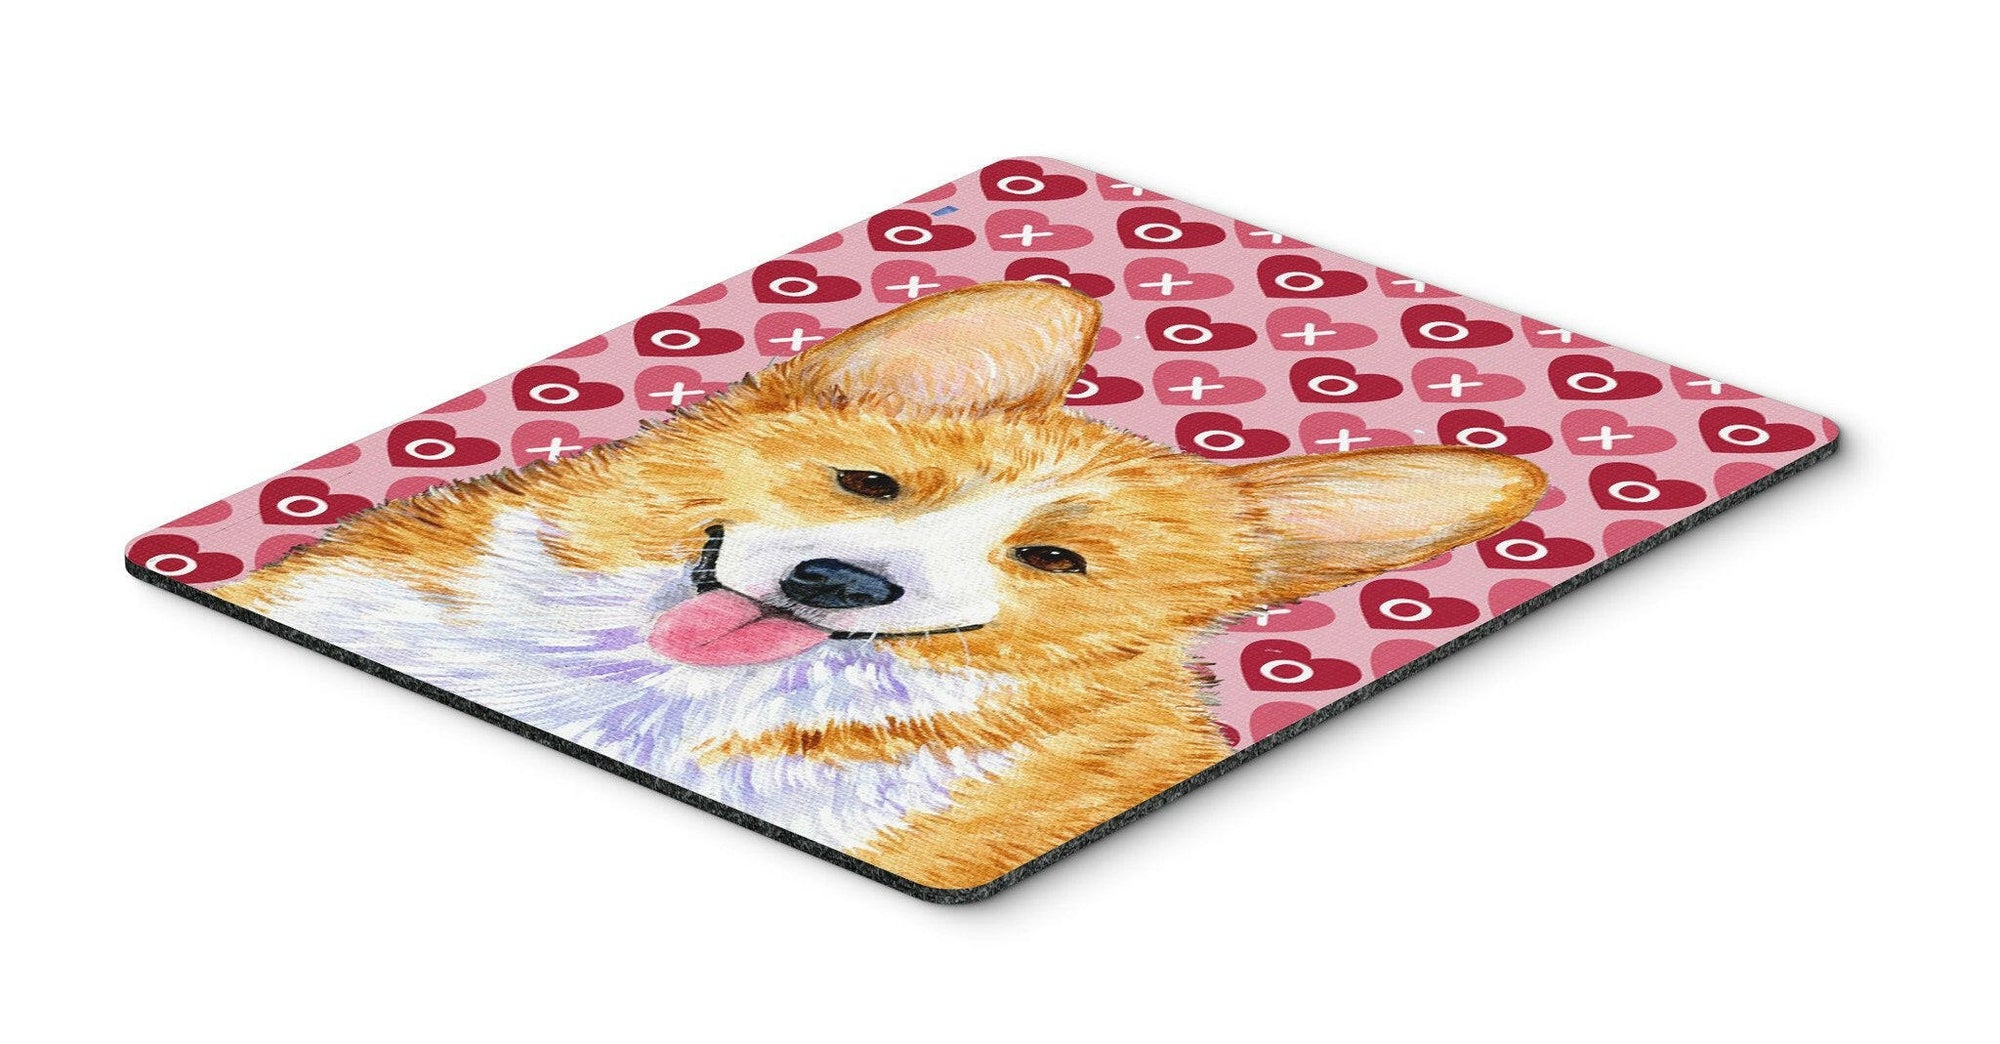 Corgi Hearts Love and Valentine's Day Portrait Mouse Pad, Hot Pad or Trivet by Caroline's Treasures